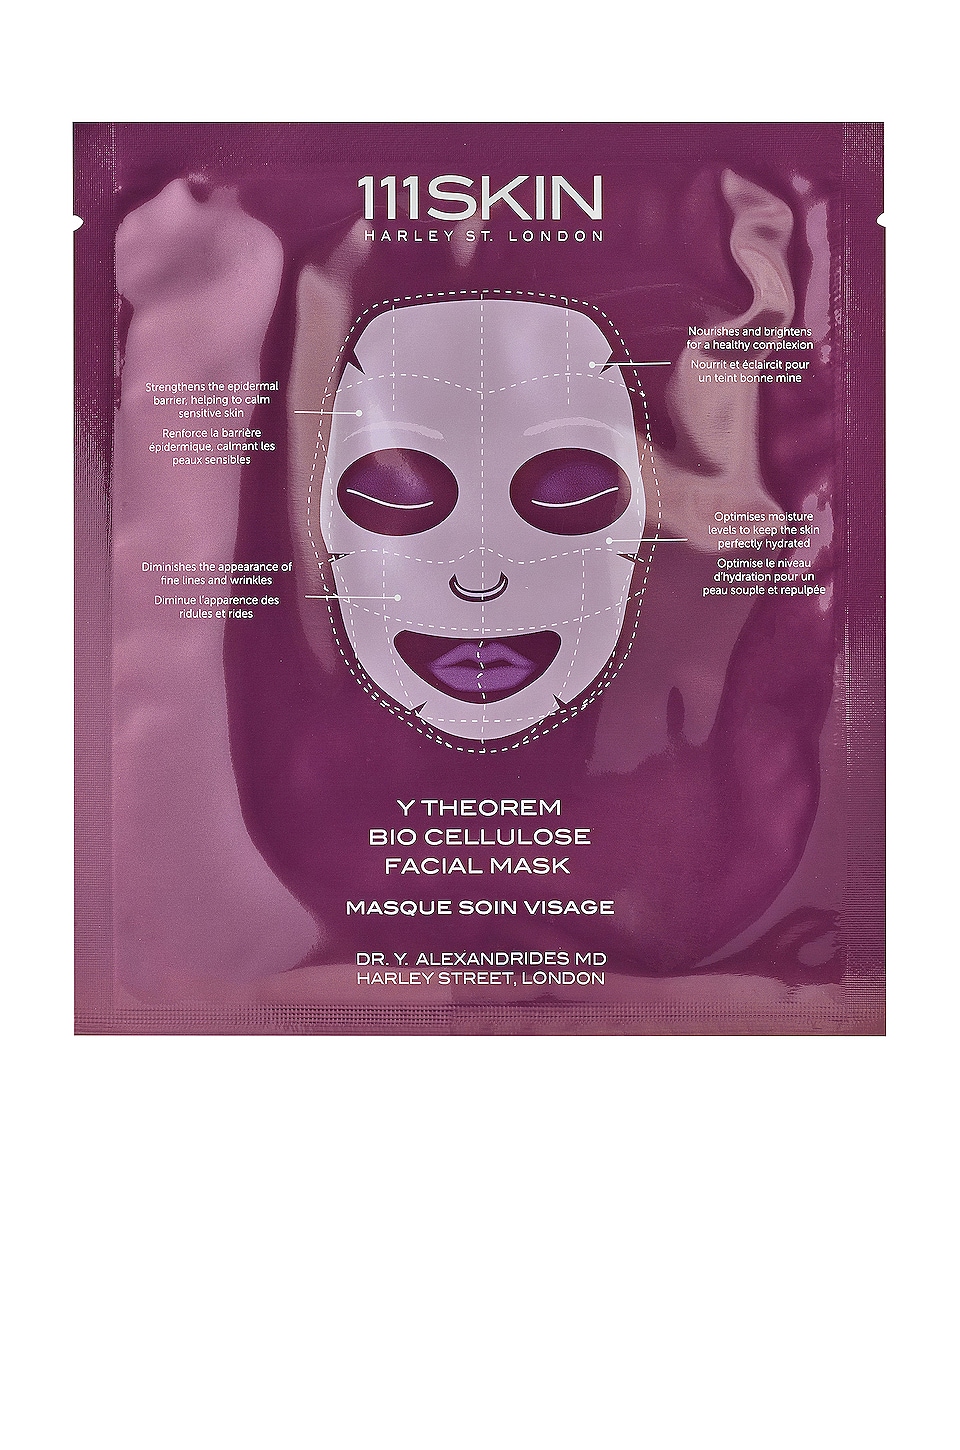 Image 1 of Y Theorem Bio Cellulose Facial Mask 5 Pack